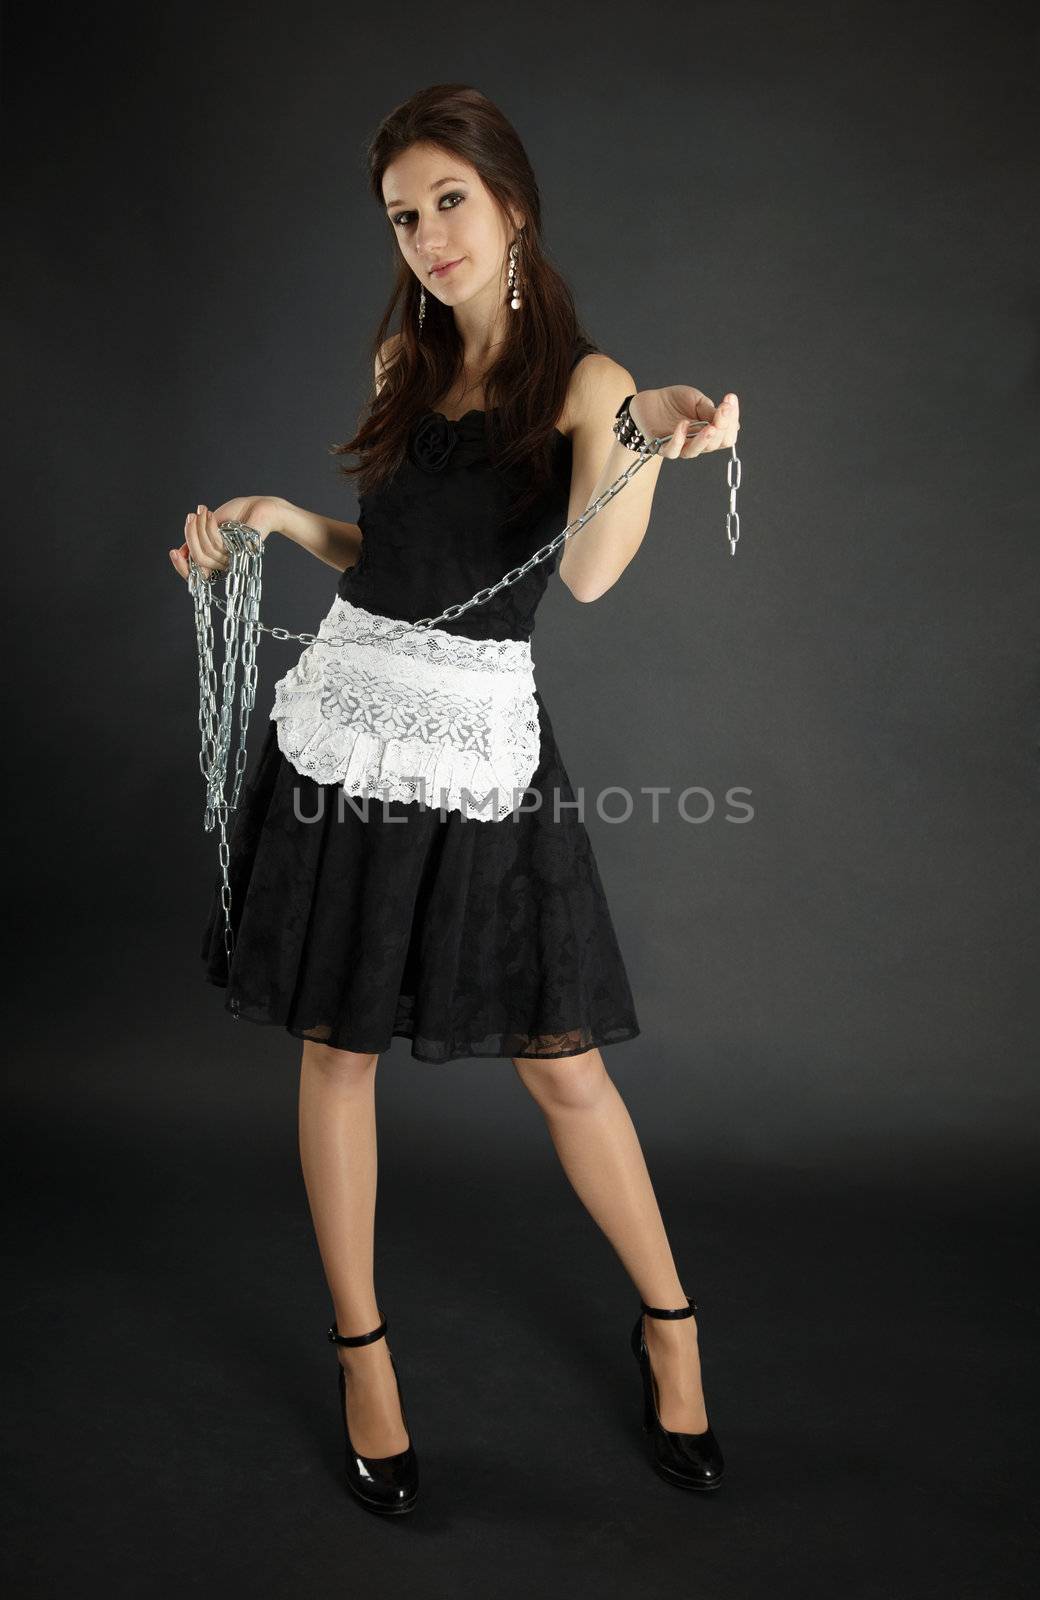 Woman in maid costume with chain by pzaxe